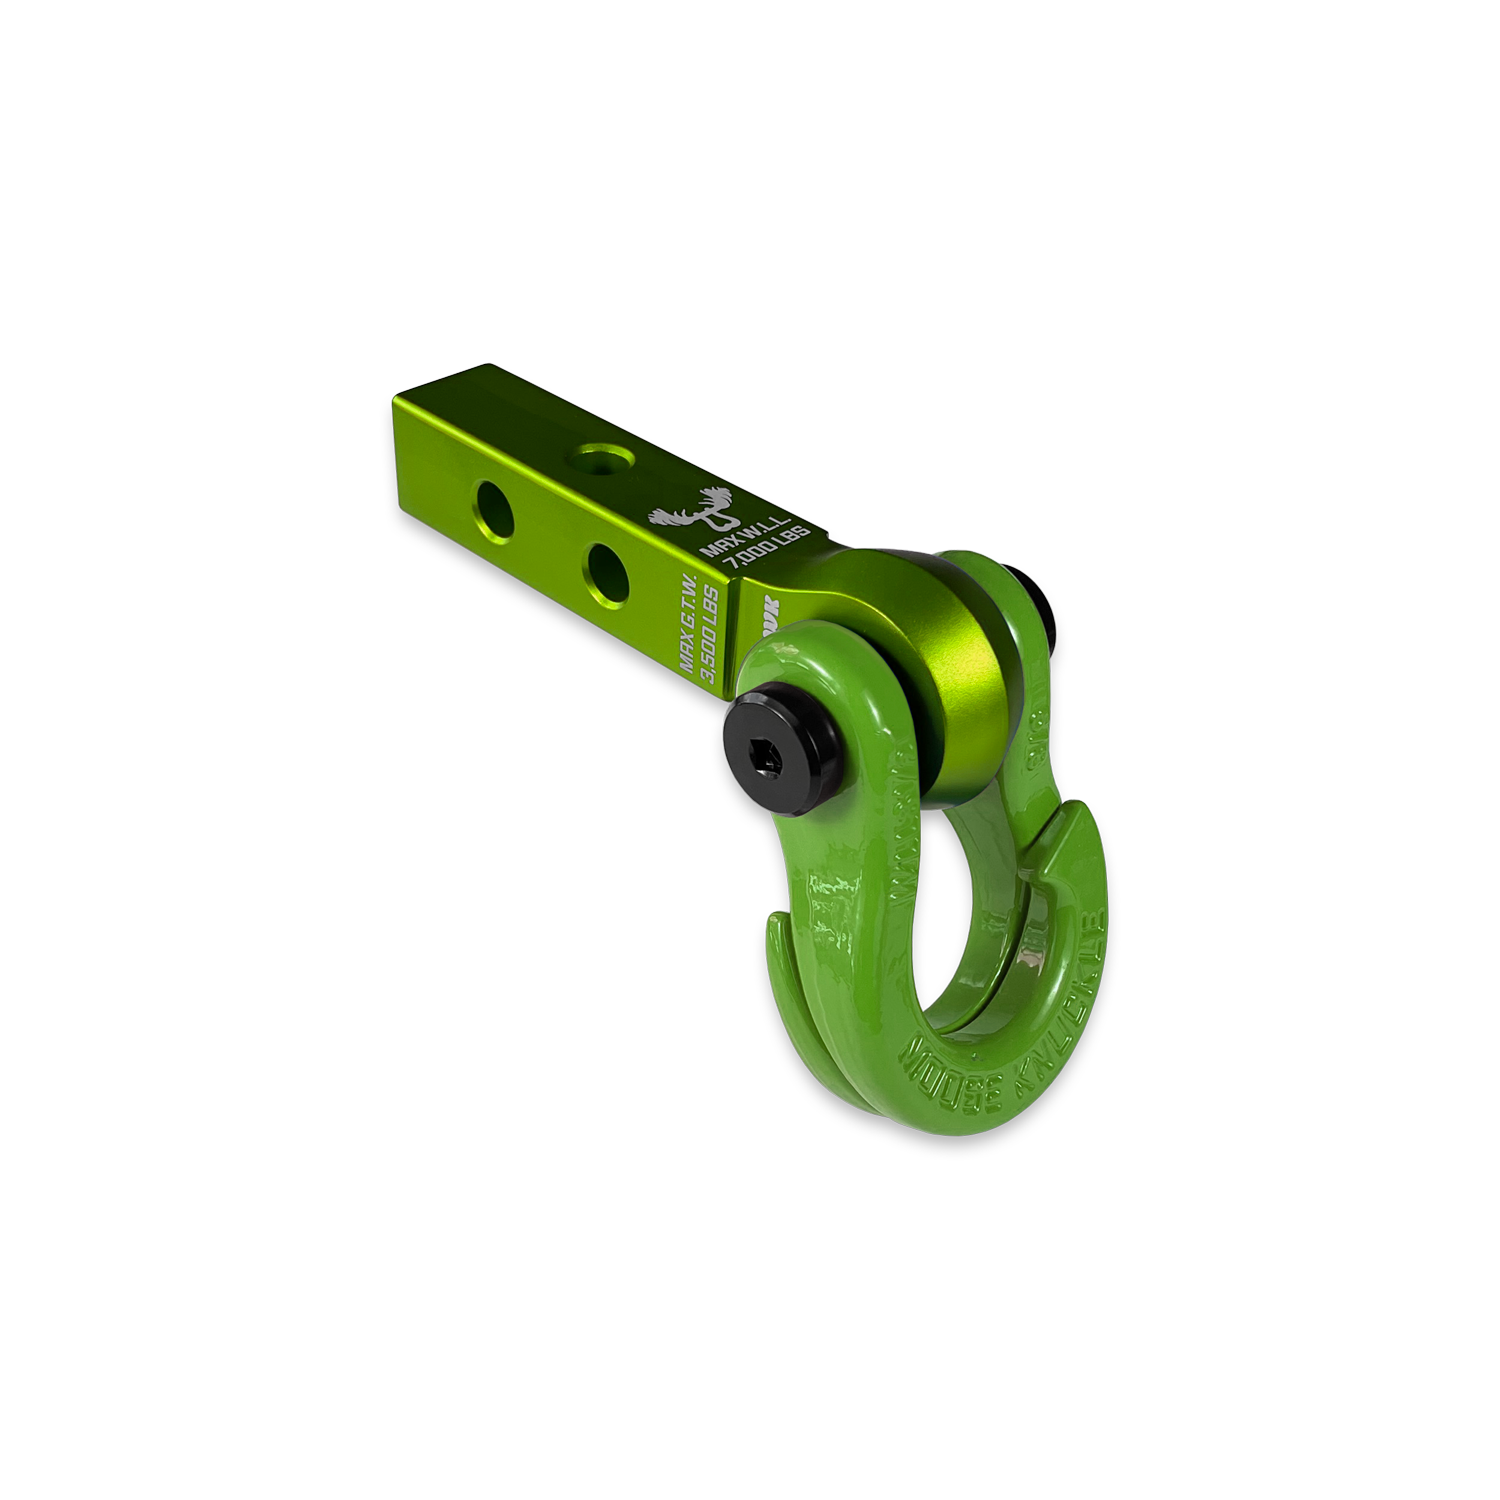 Jowl 5/8 Split Shackle & 1.25 Receiver (Bean Green and Sublime Green)